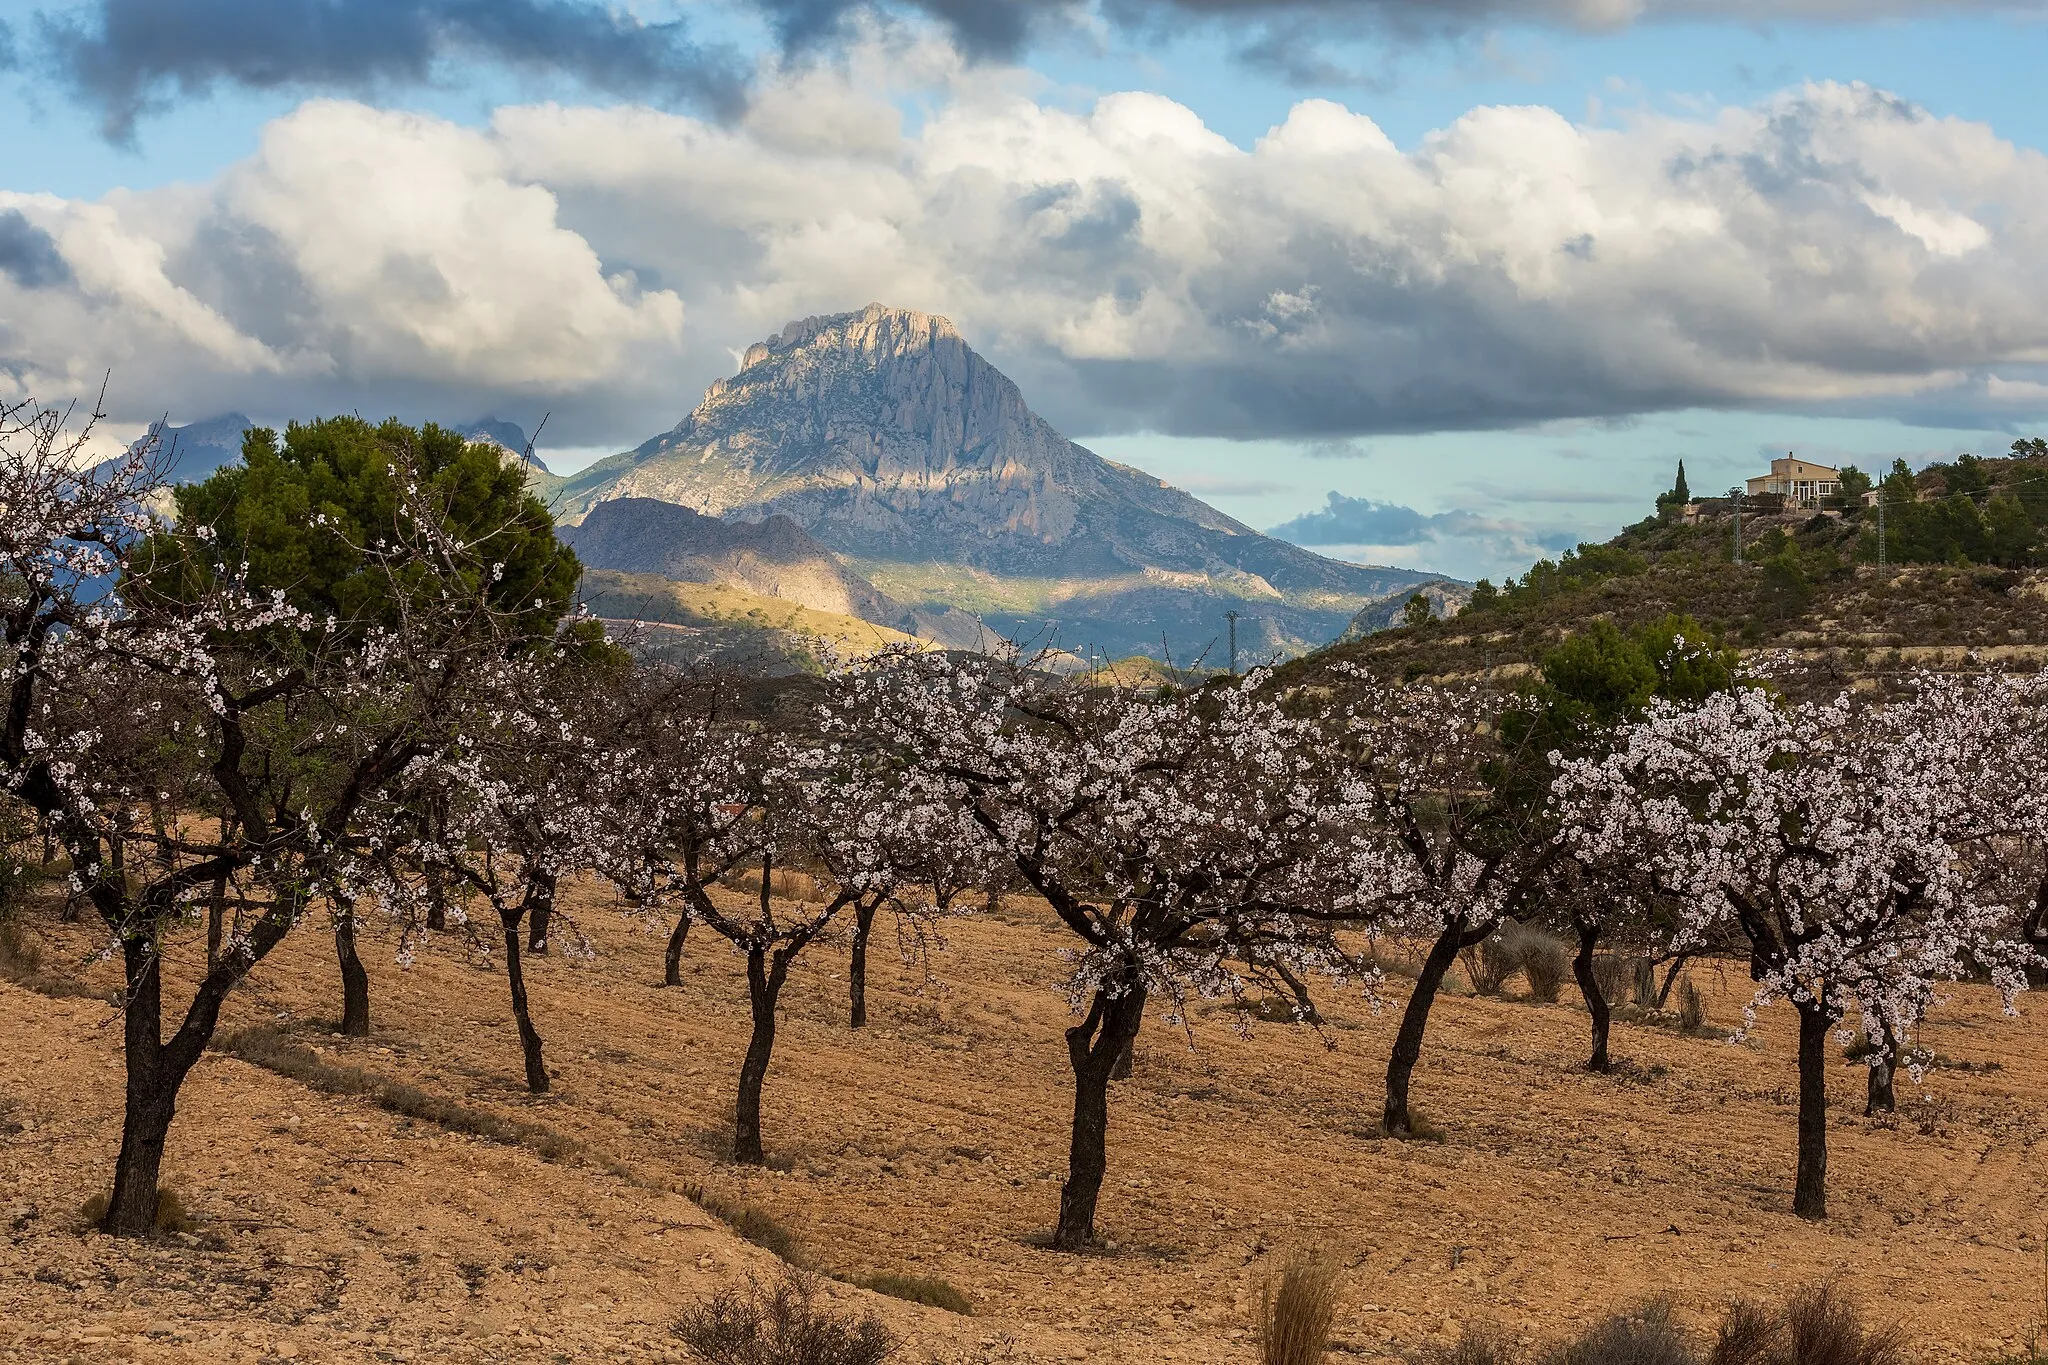 Photo showing: Almond cultivation in the mountains of Relleu municipality in Alicante, Spain in 2022 January. The mountain in the background is Puig Campana.